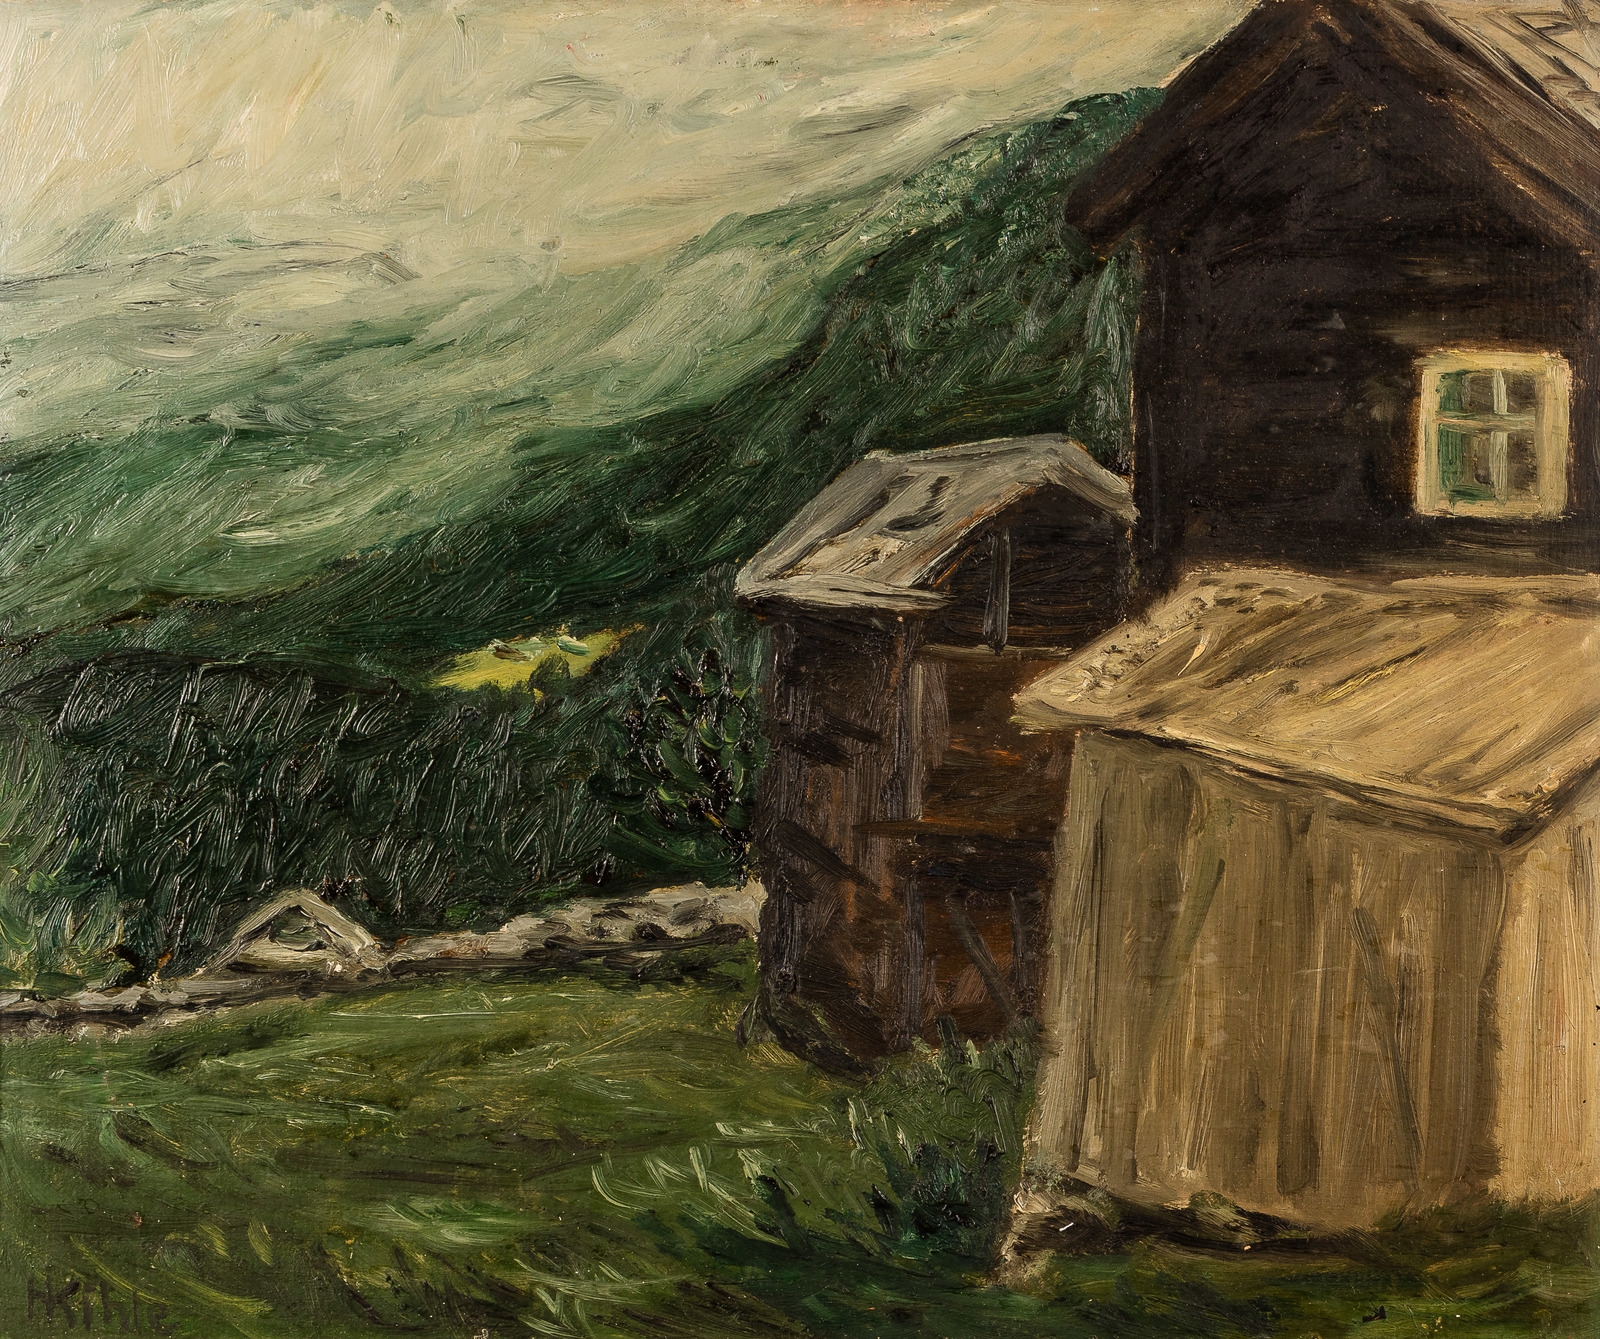 Regn over Ormeggene by Harald Kihle, 1947